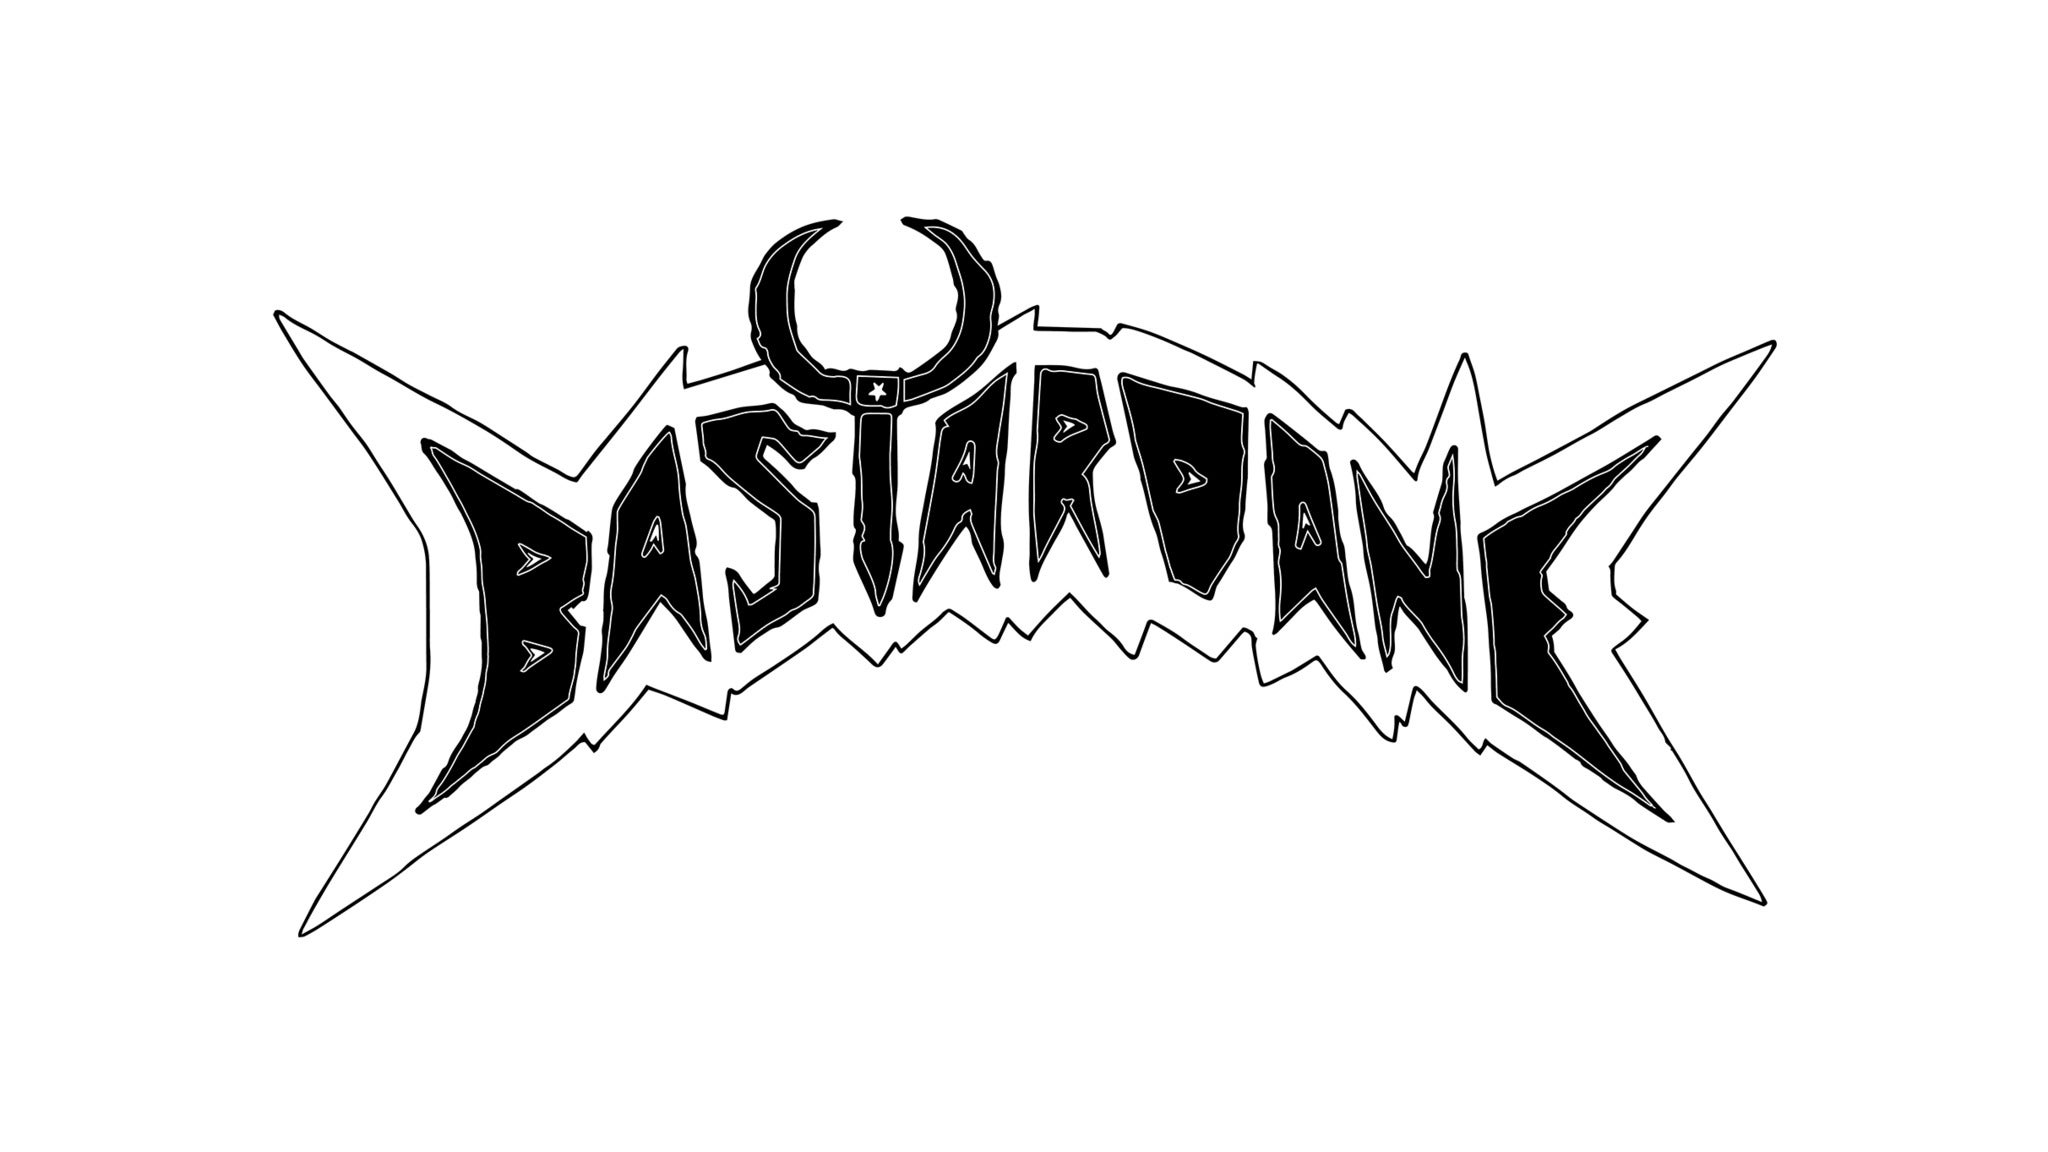 Bastardane presale code for show tickets in Cleveland, OH (House of Blues Cleveland)